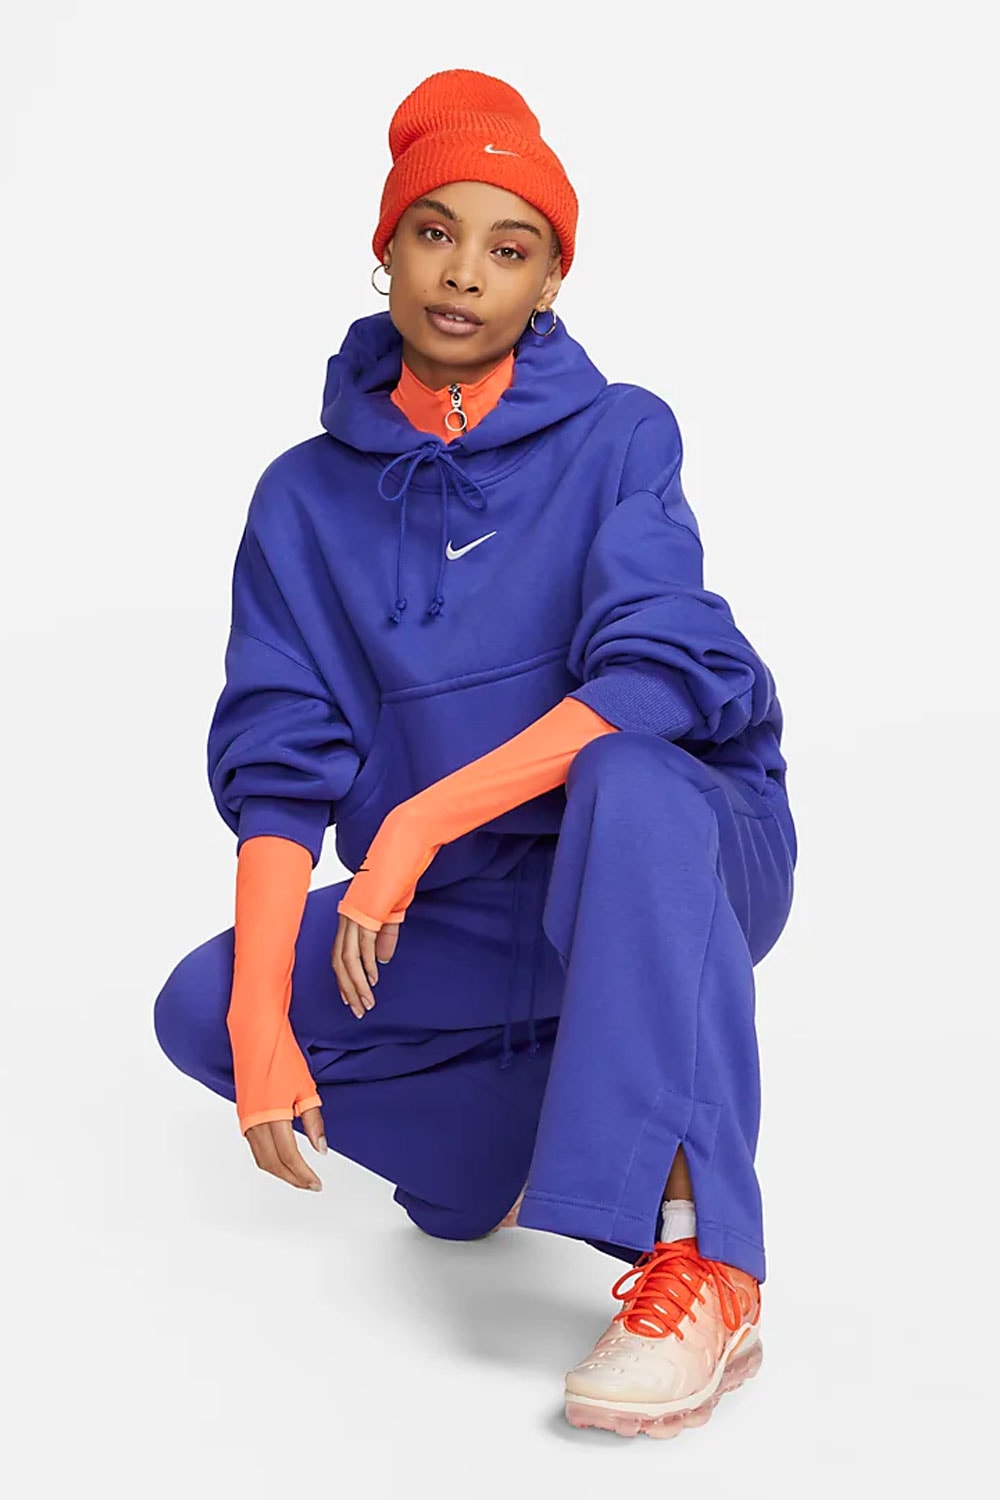 Shop Nike's Lineup of Back-to-School Essentials | Hypebae